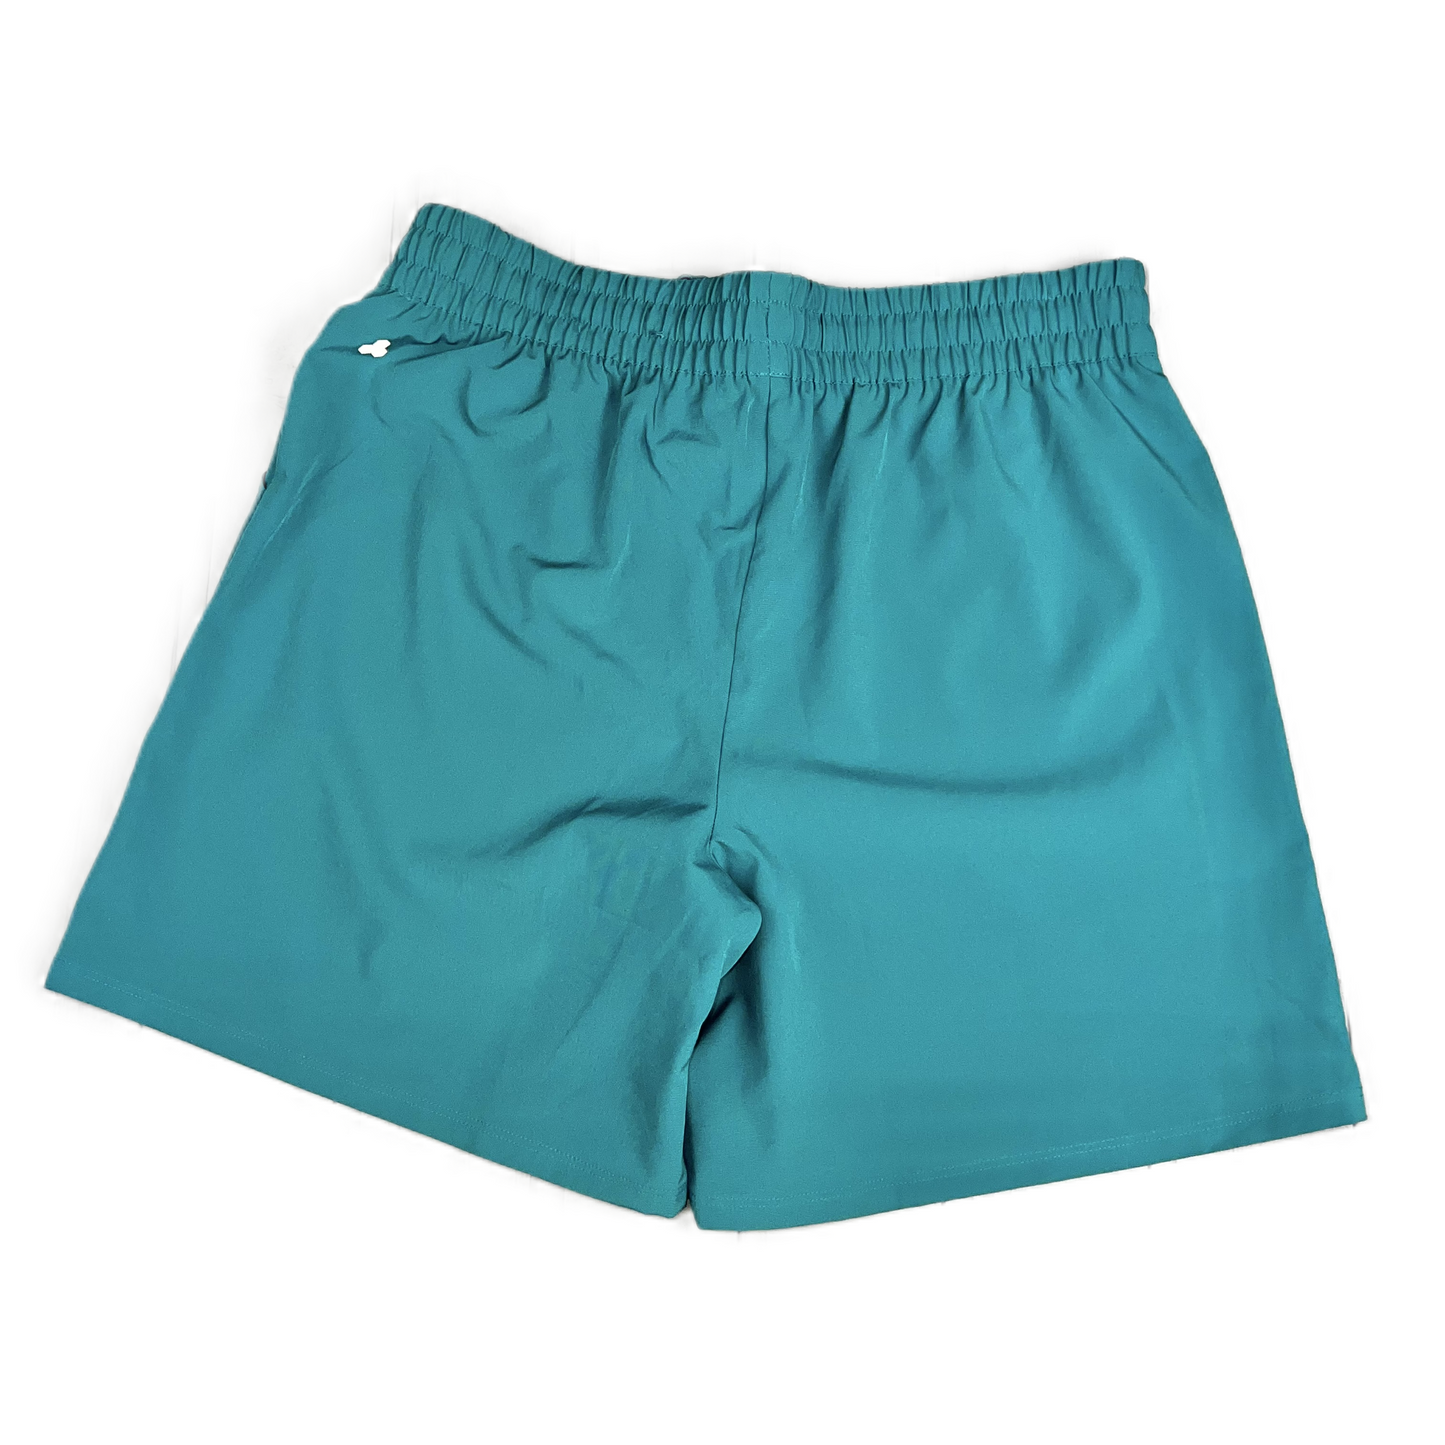 Teal Athletic Shorts By Tek Gear, Size: 1x